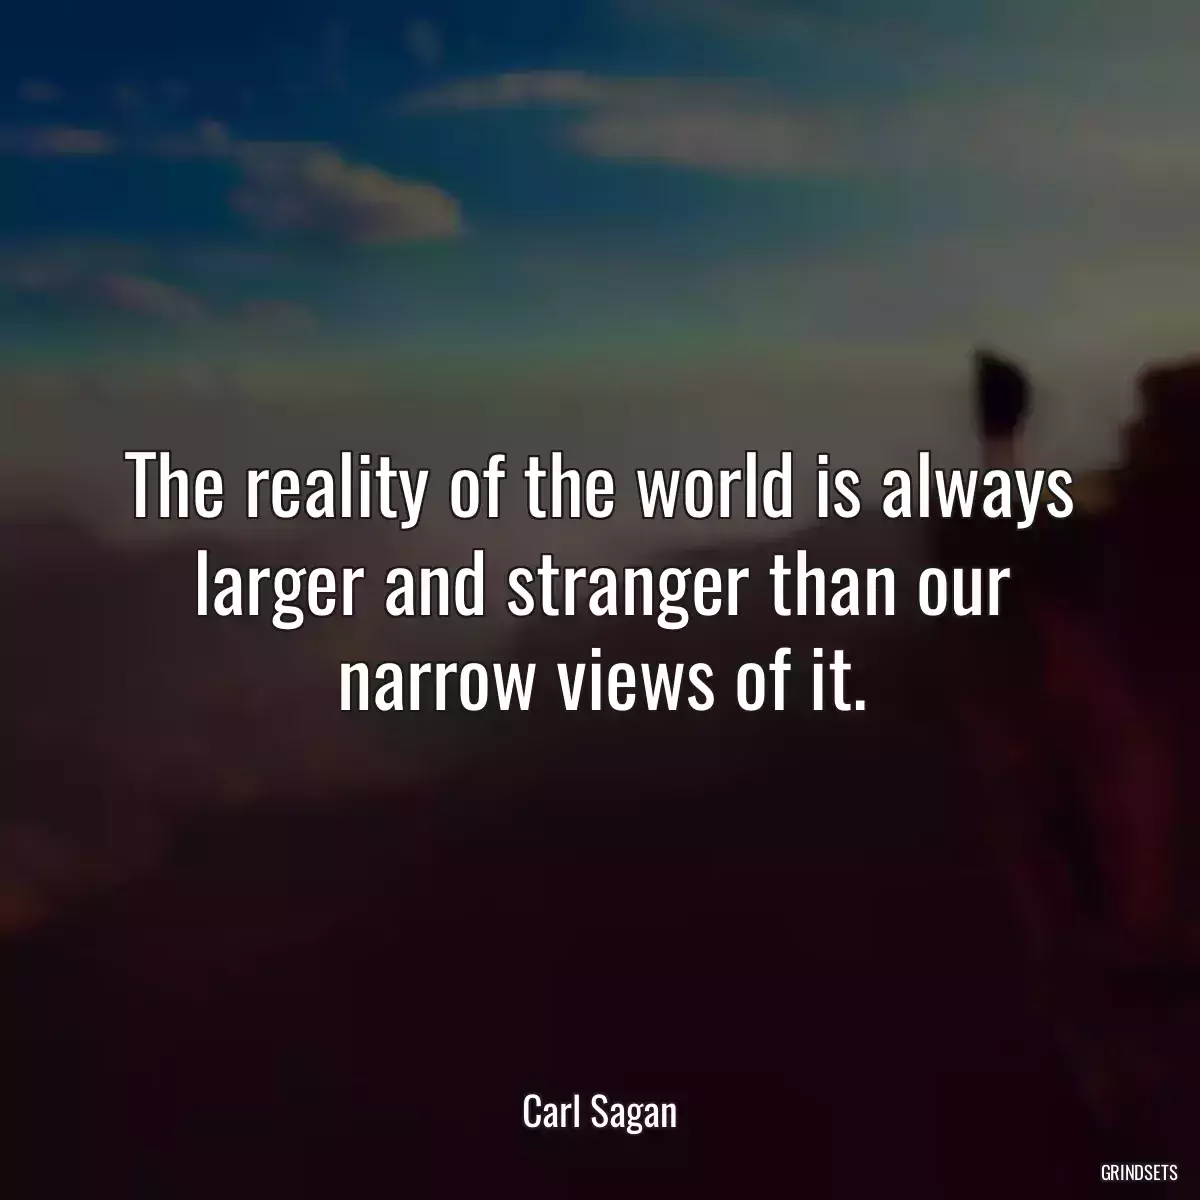 The reality of the world is always larger and stranger than our narrow views of it.